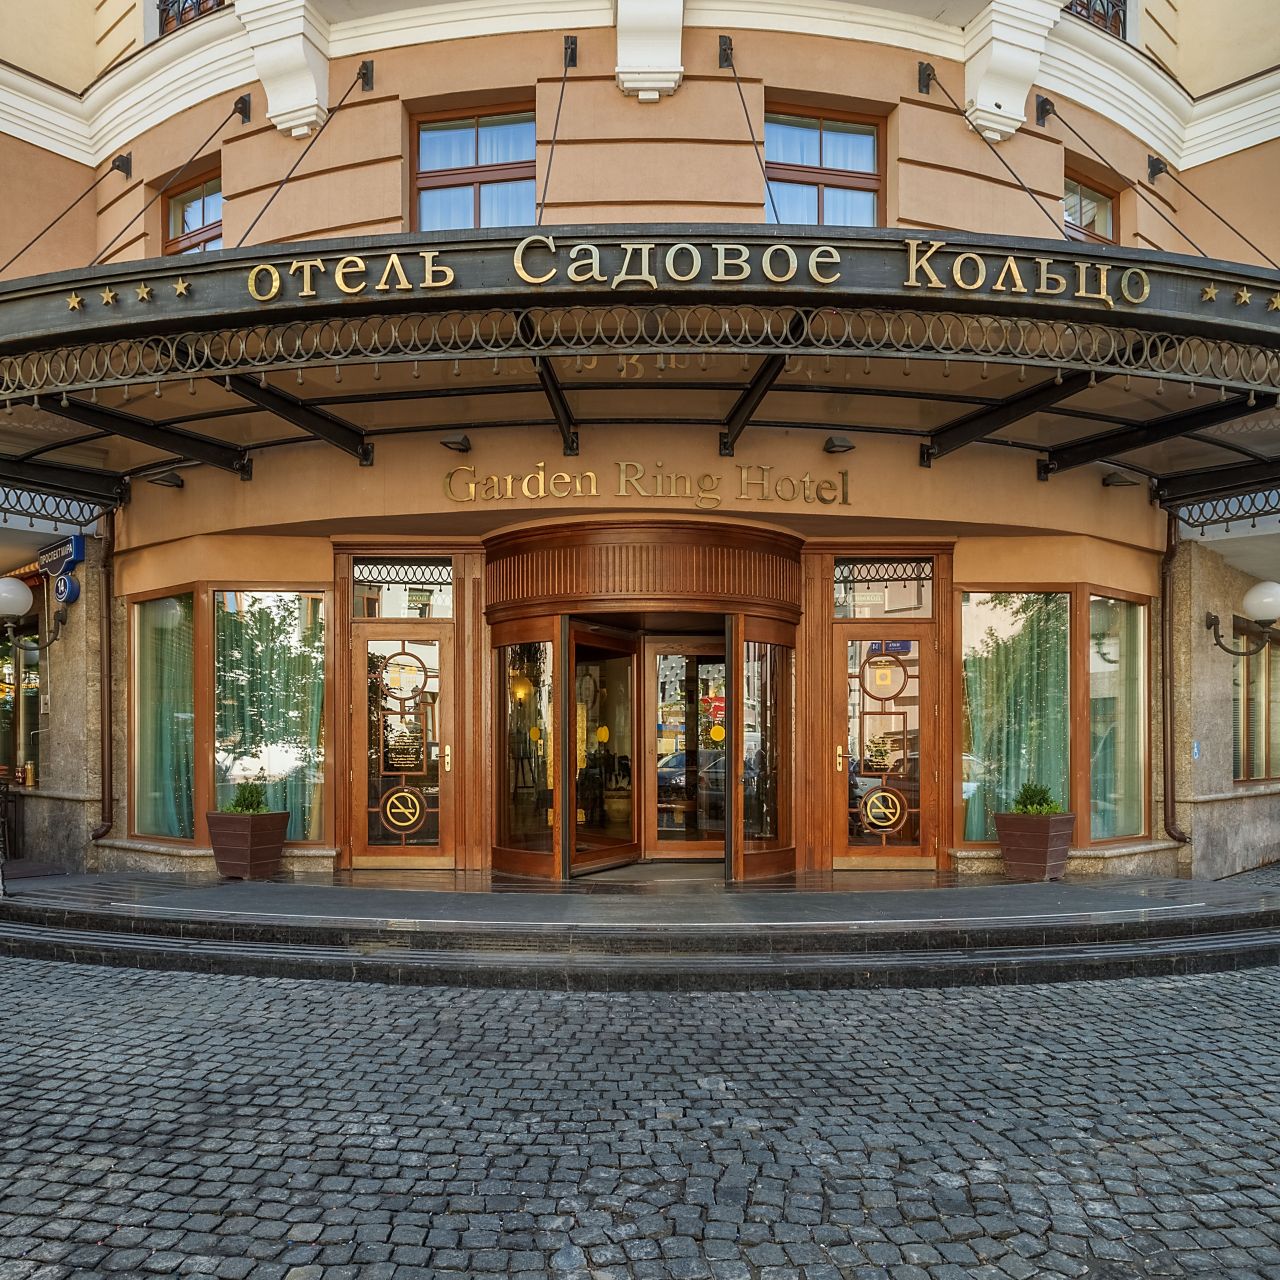 Garden Ring Hotel - Moscow - Great prices at HOTEL INFO